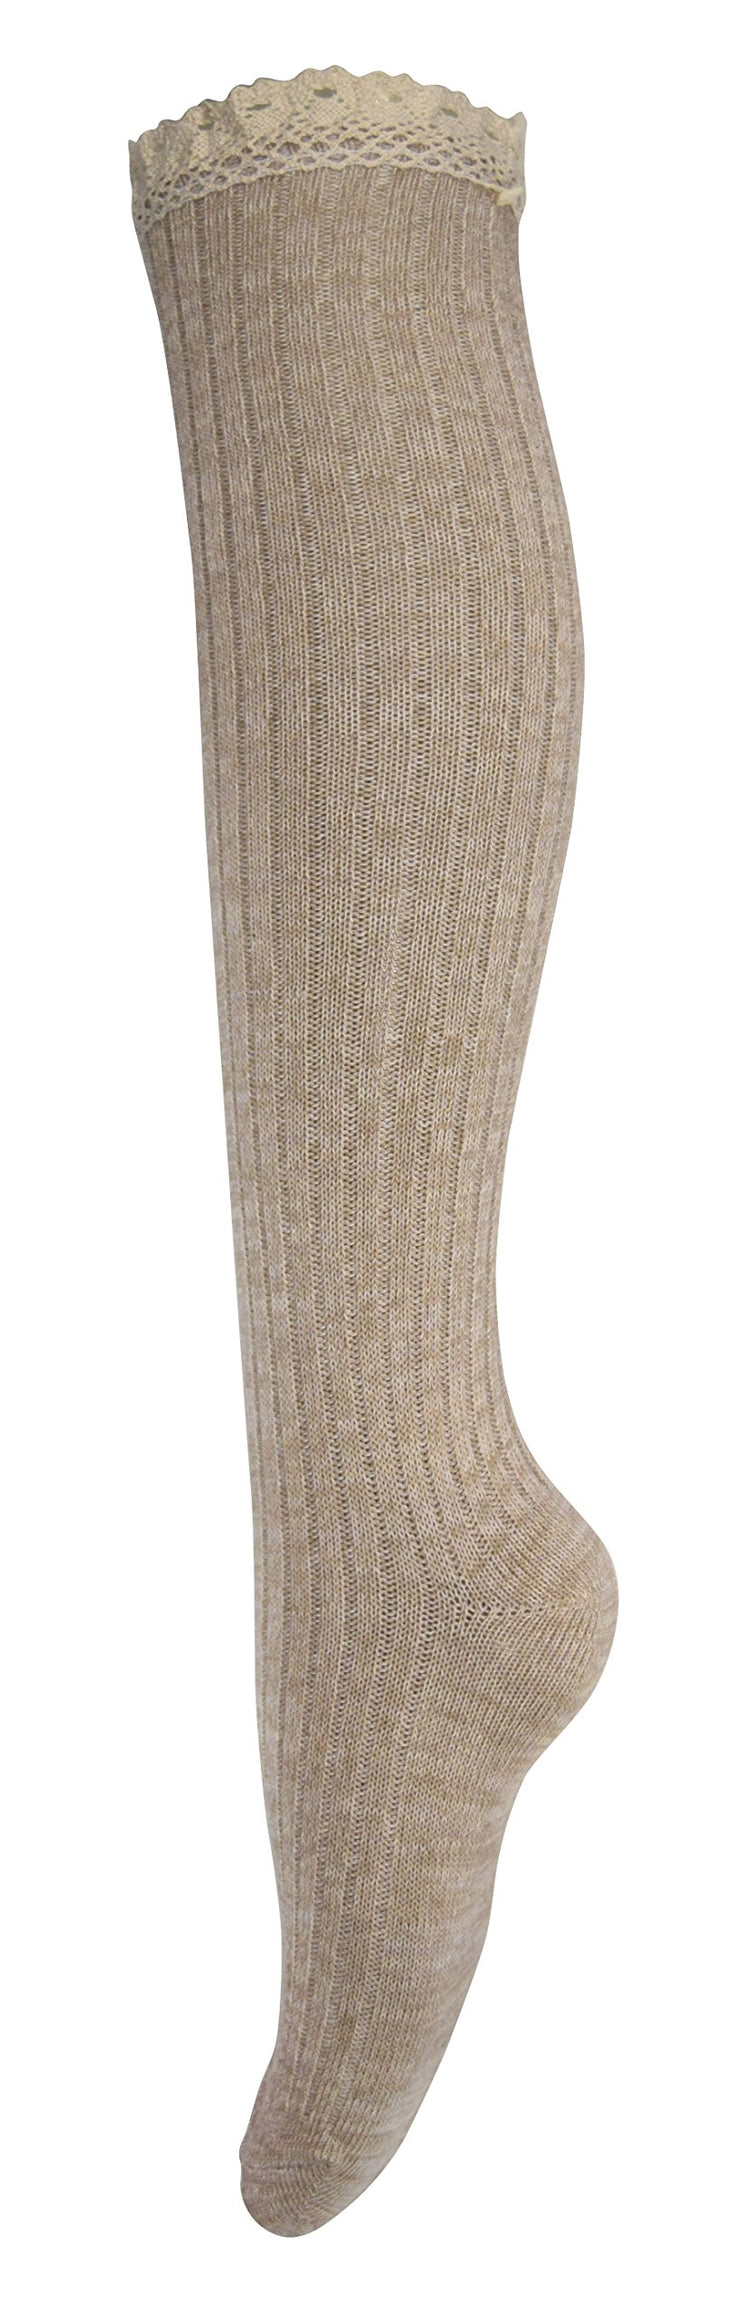 Lace Trimmed Warm Stylish Cotton Knit Knee High Boot Socks